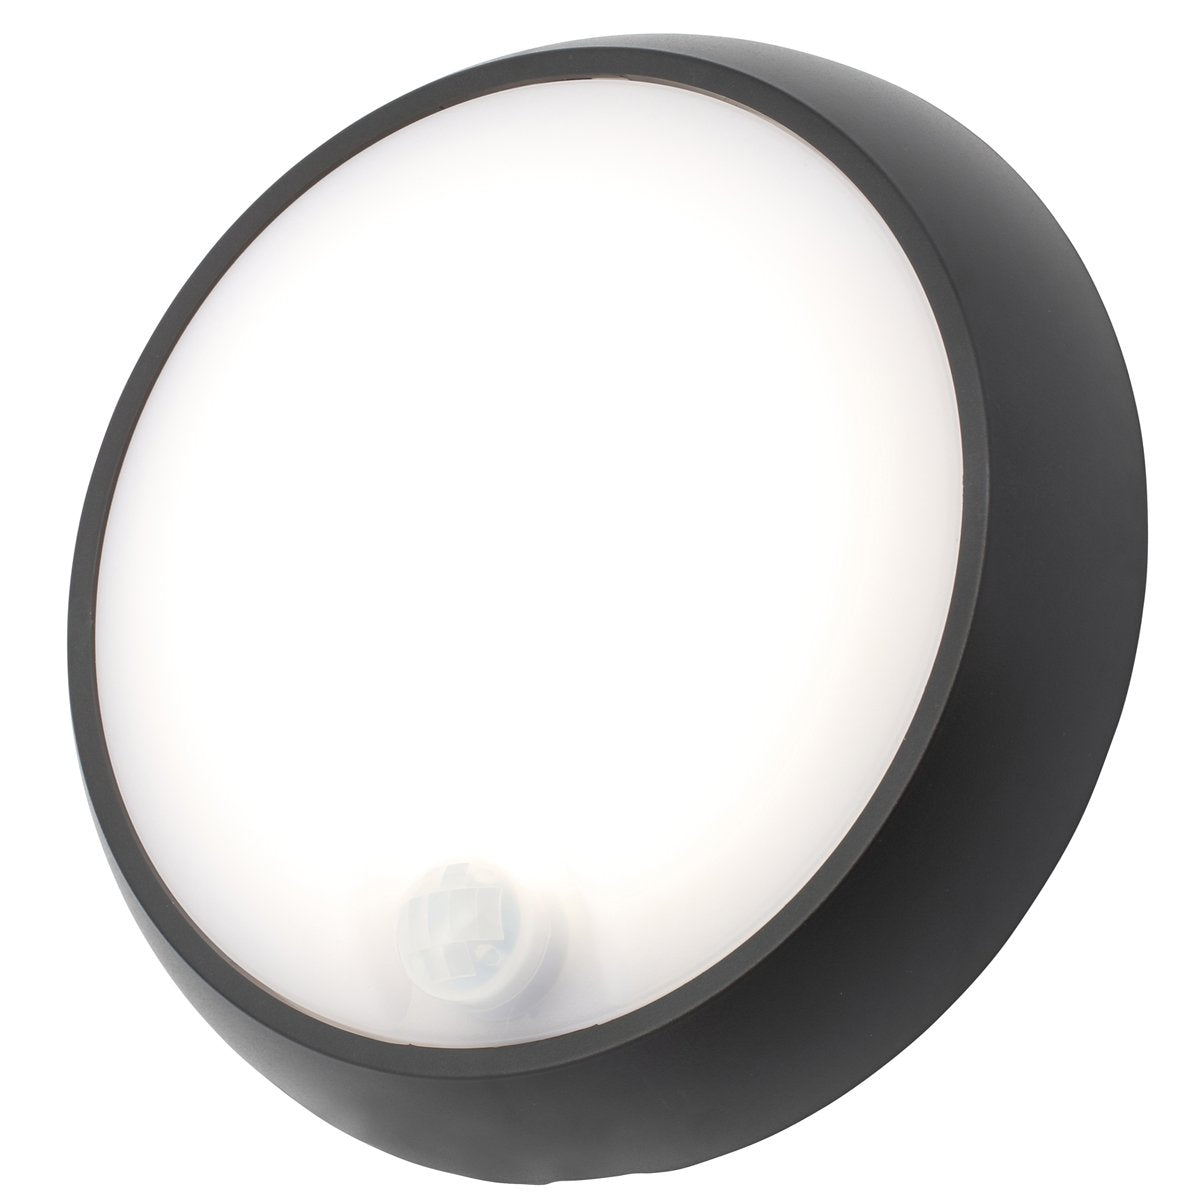 Zara black and white round wall light with motion sensor is an modern simple fitting with a black polycarbonate body and opal diffuser. This stylish wall light is perfect for adding a pinch of modern flavour to doorways, sheds, patios, porch, driveways, garages, sheds, and more. This fitting is IP54 rated which makes it fully weatherproof light fitting.